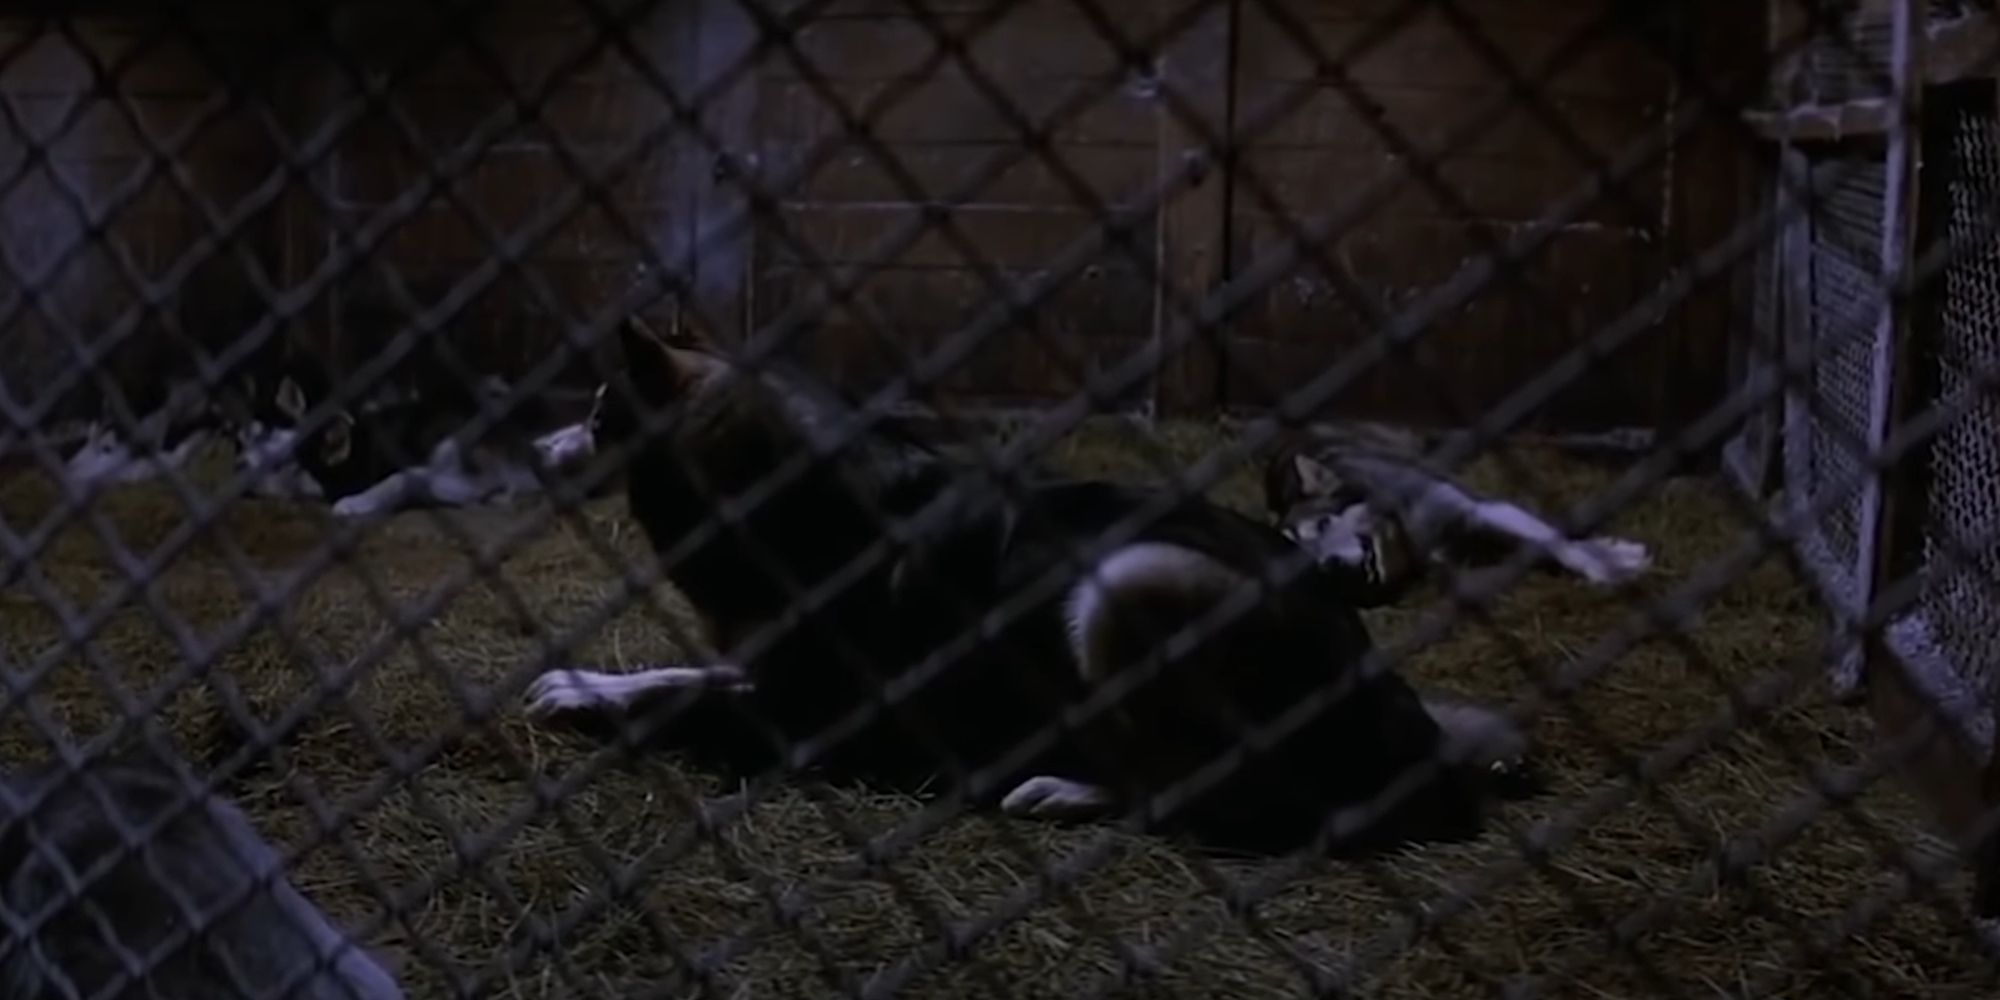 The Dog Thing with the rest of the dogs in the kennel in John Carpenters The Thing